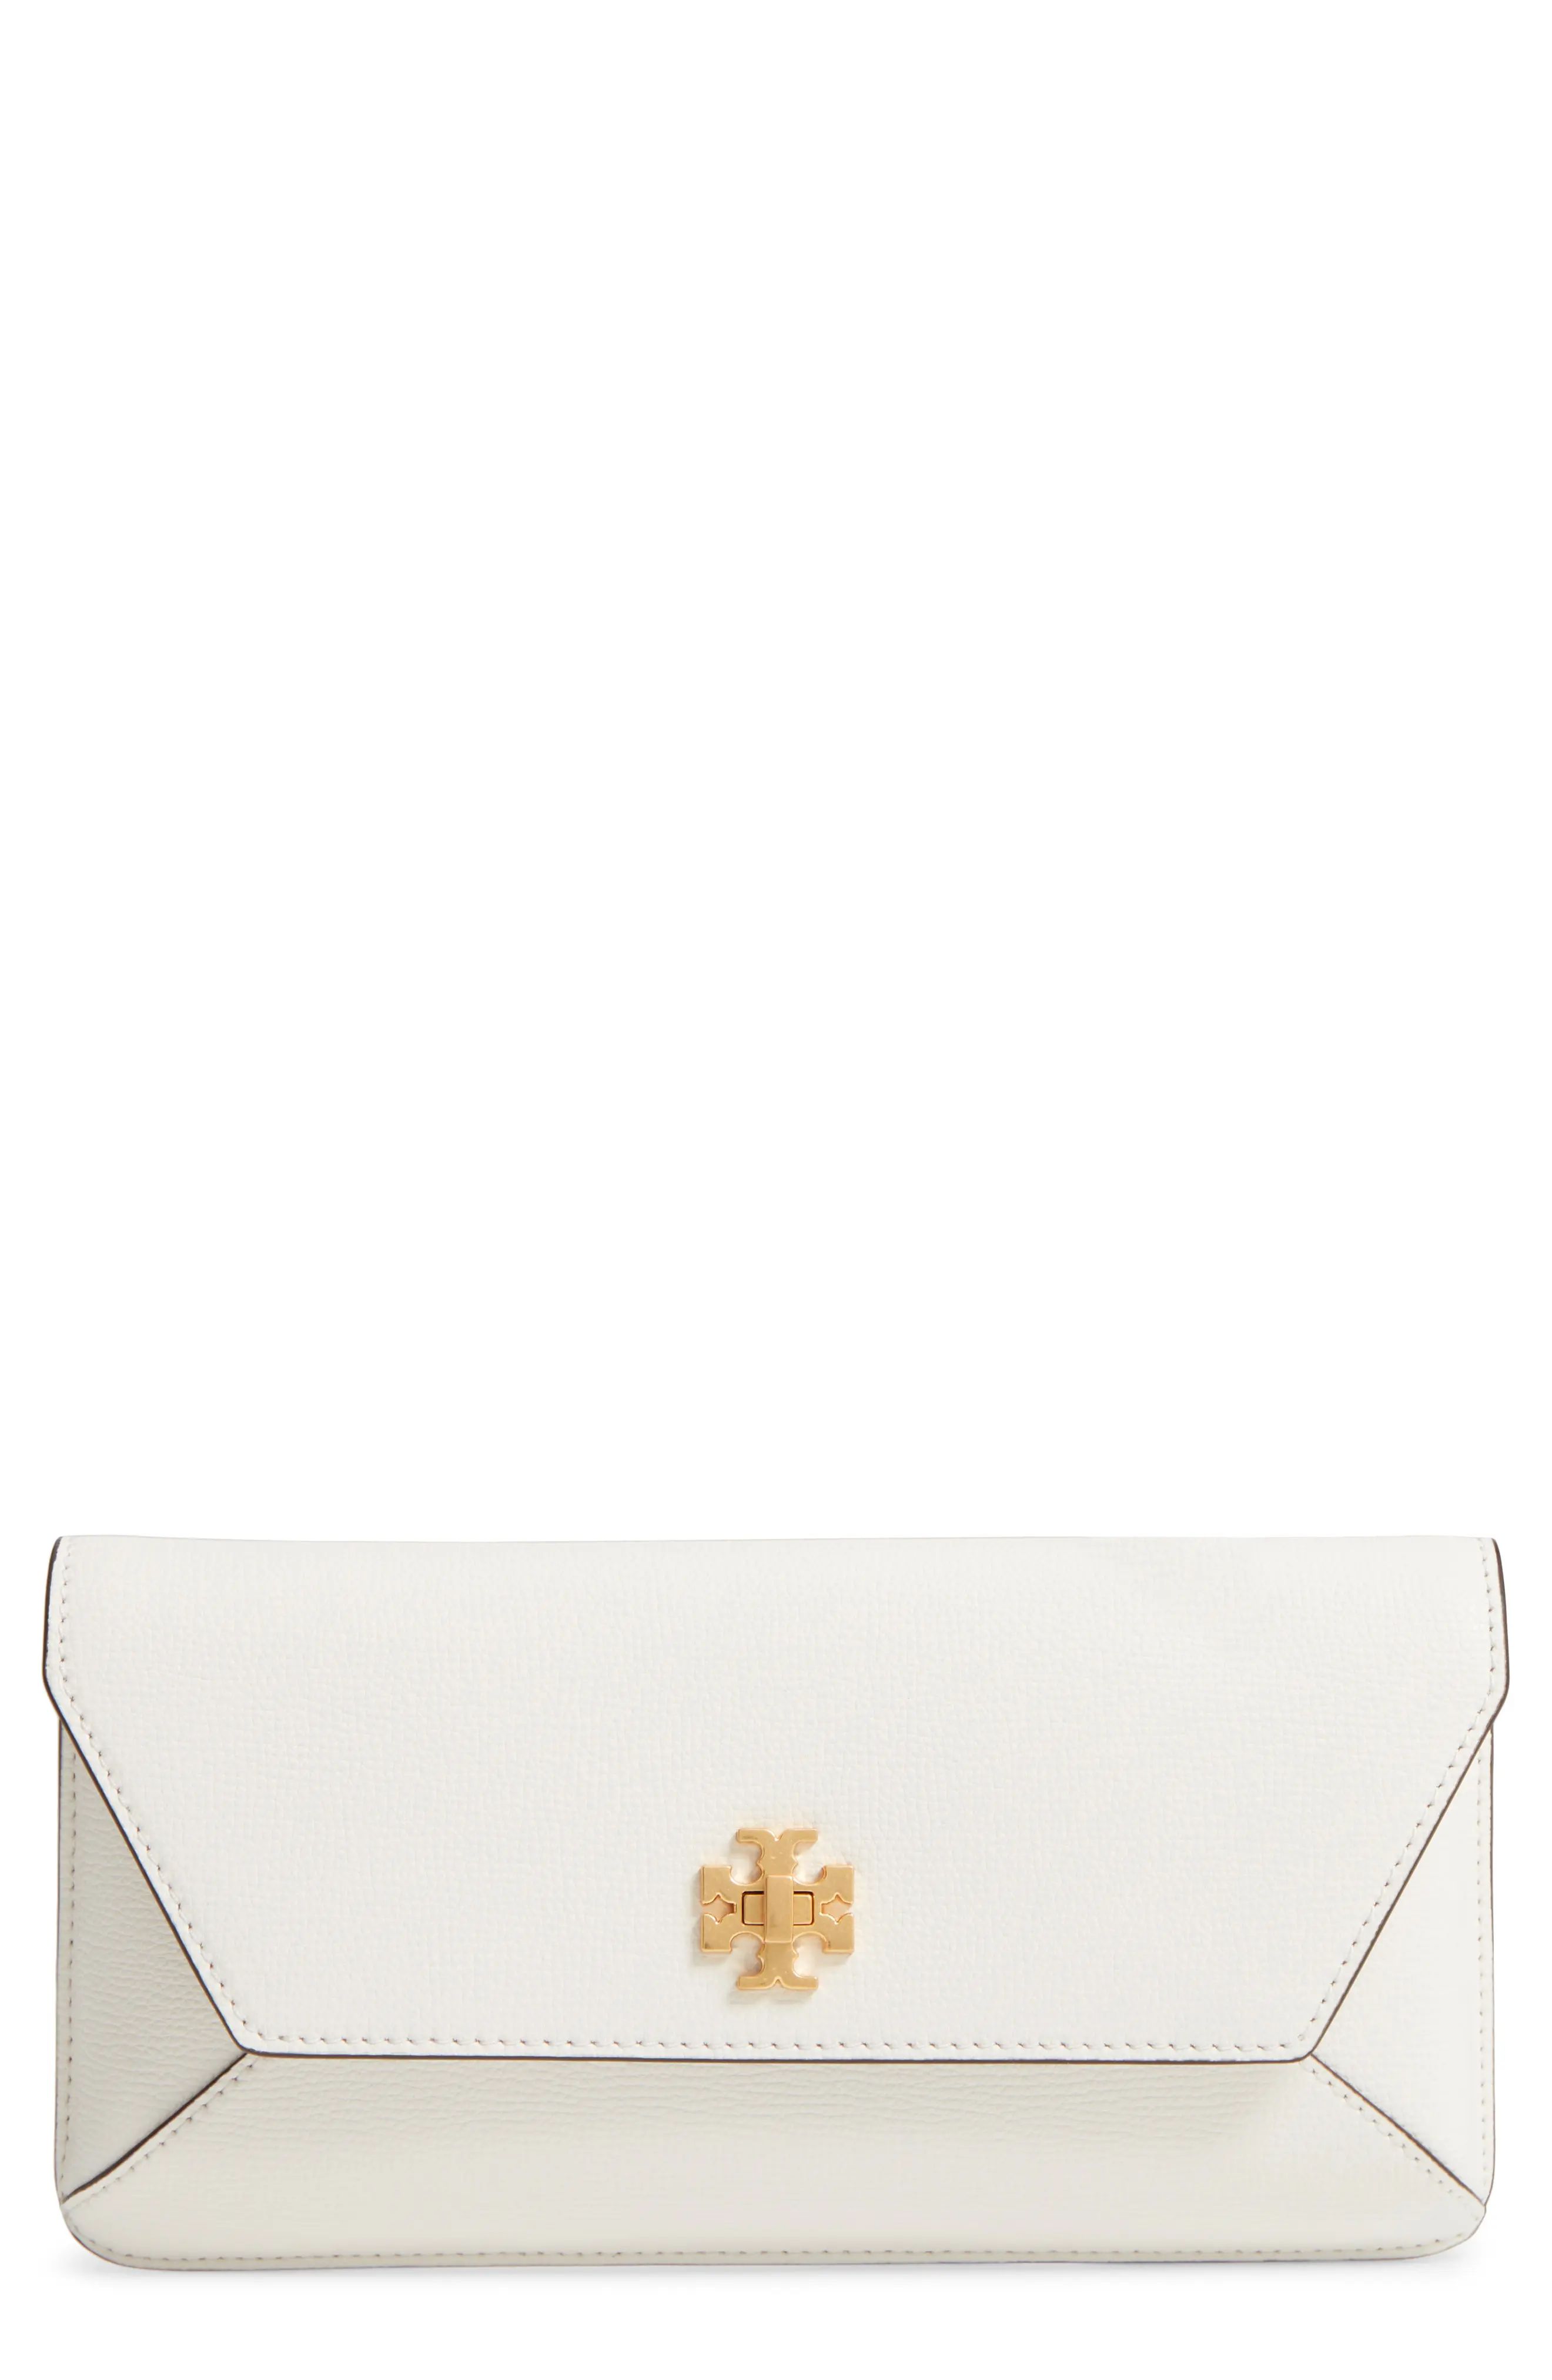 Tory Burch Kira Leather Envelope Clutch | Nordstrom